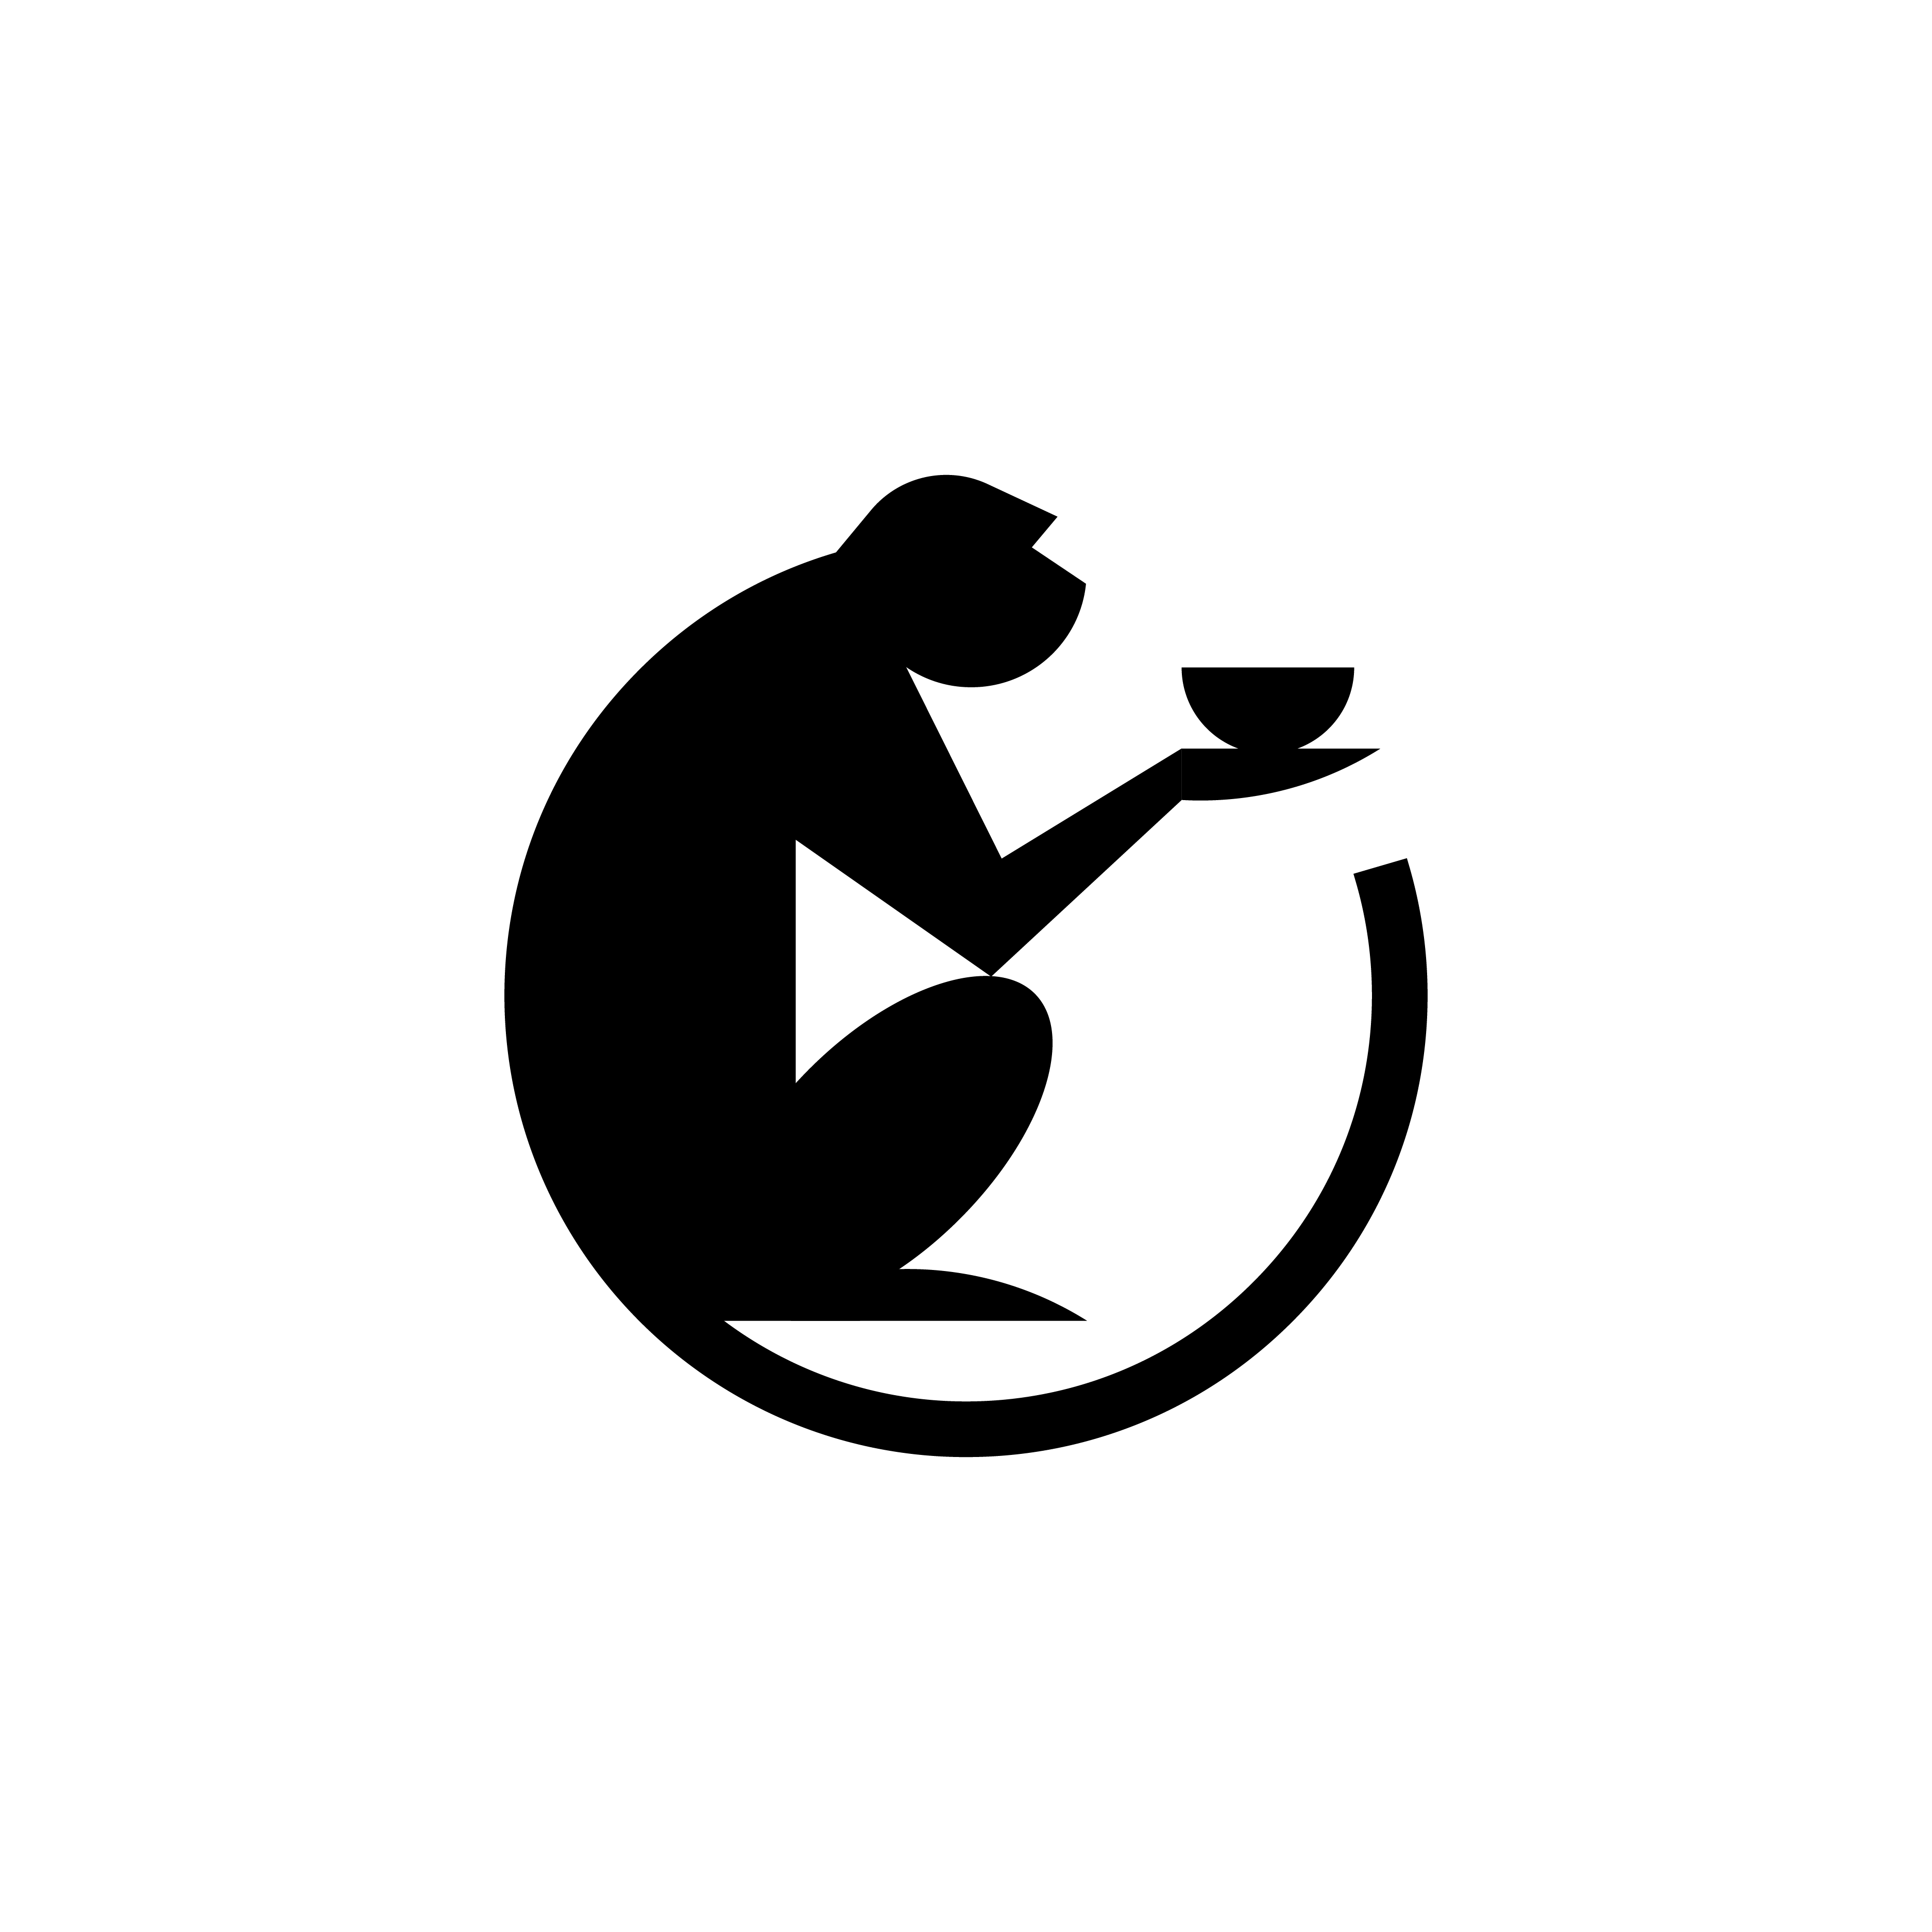 Monkey logo design by logo designer Freelancer for your inspiration and for the worlds largest logo competition